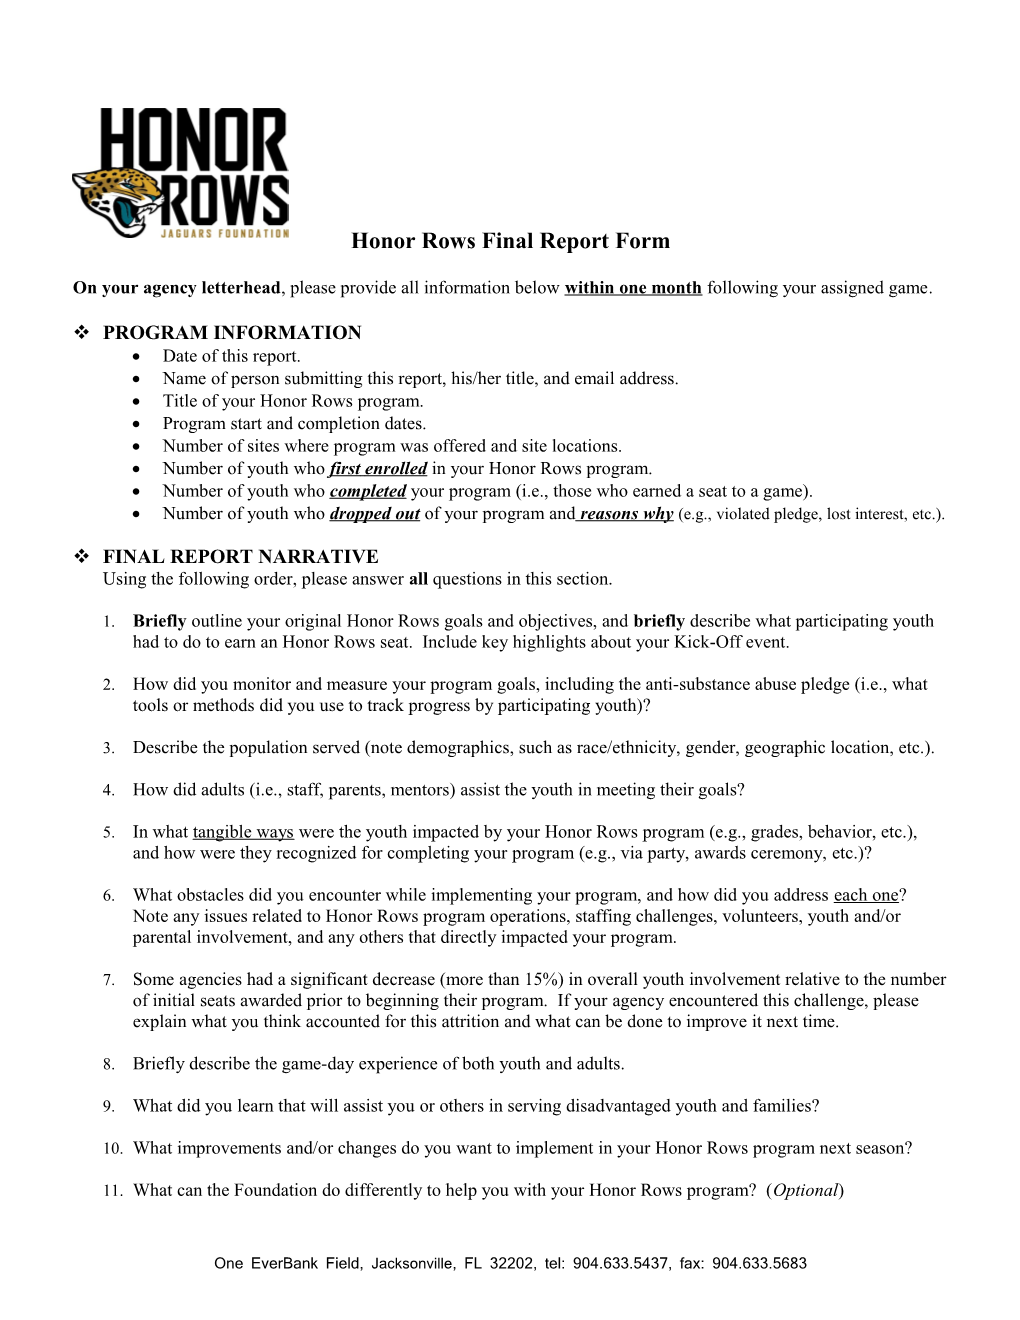 Honor Rows Final Report Form